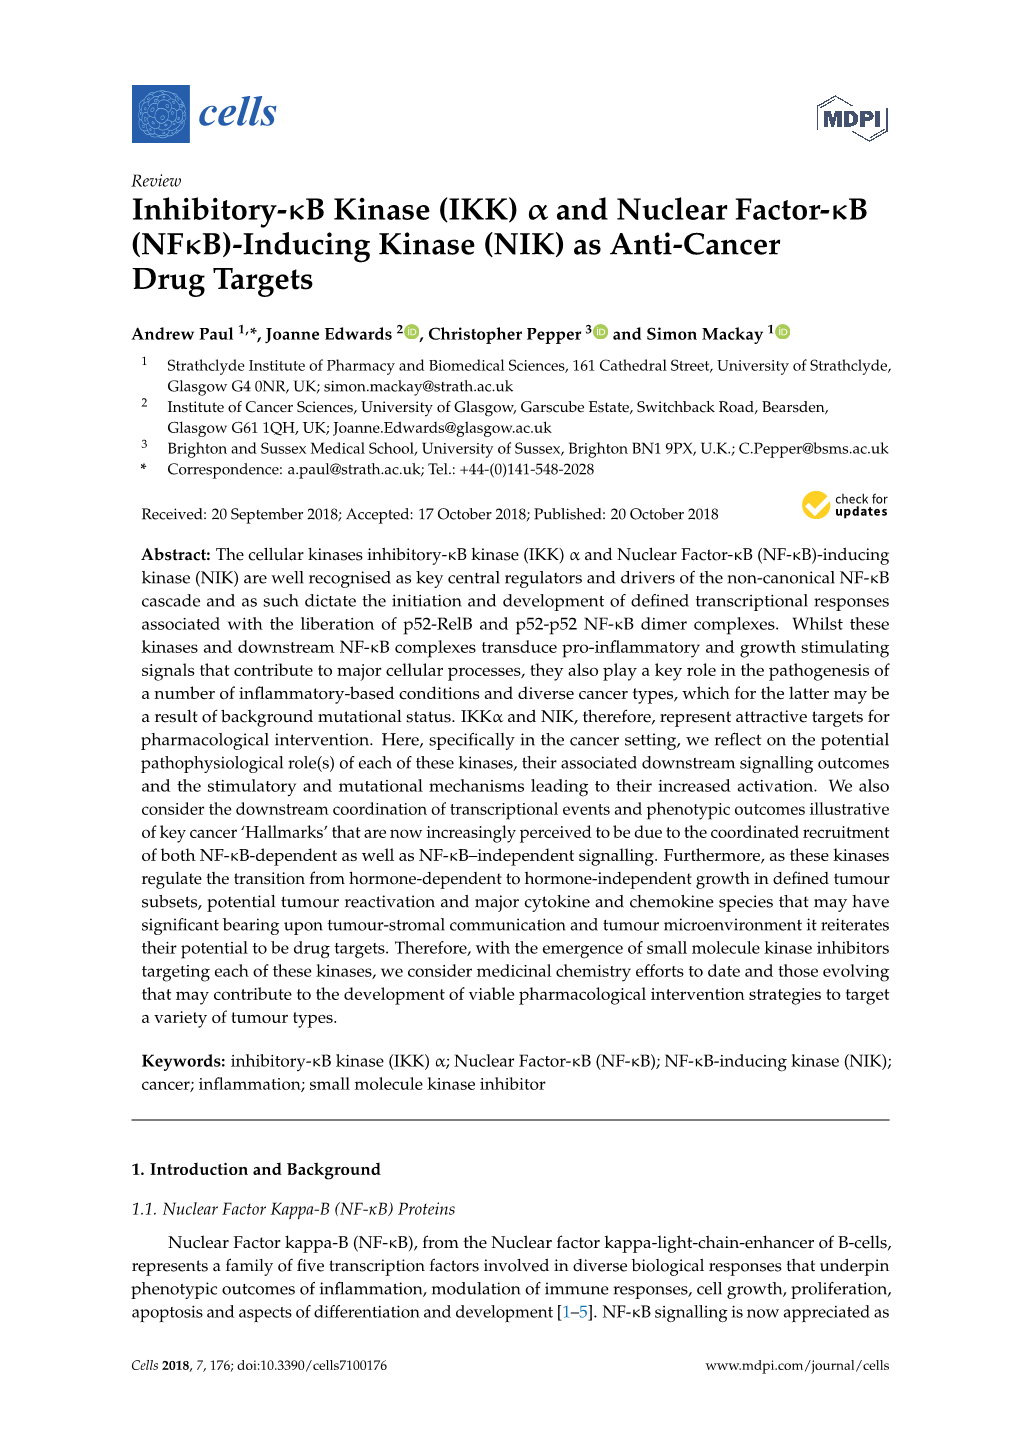 (IKK) Α and Nuclear Factor-Κb (Nfκb)-Inducing Kinase (NIK) As Anti-Cancer Drug Targets